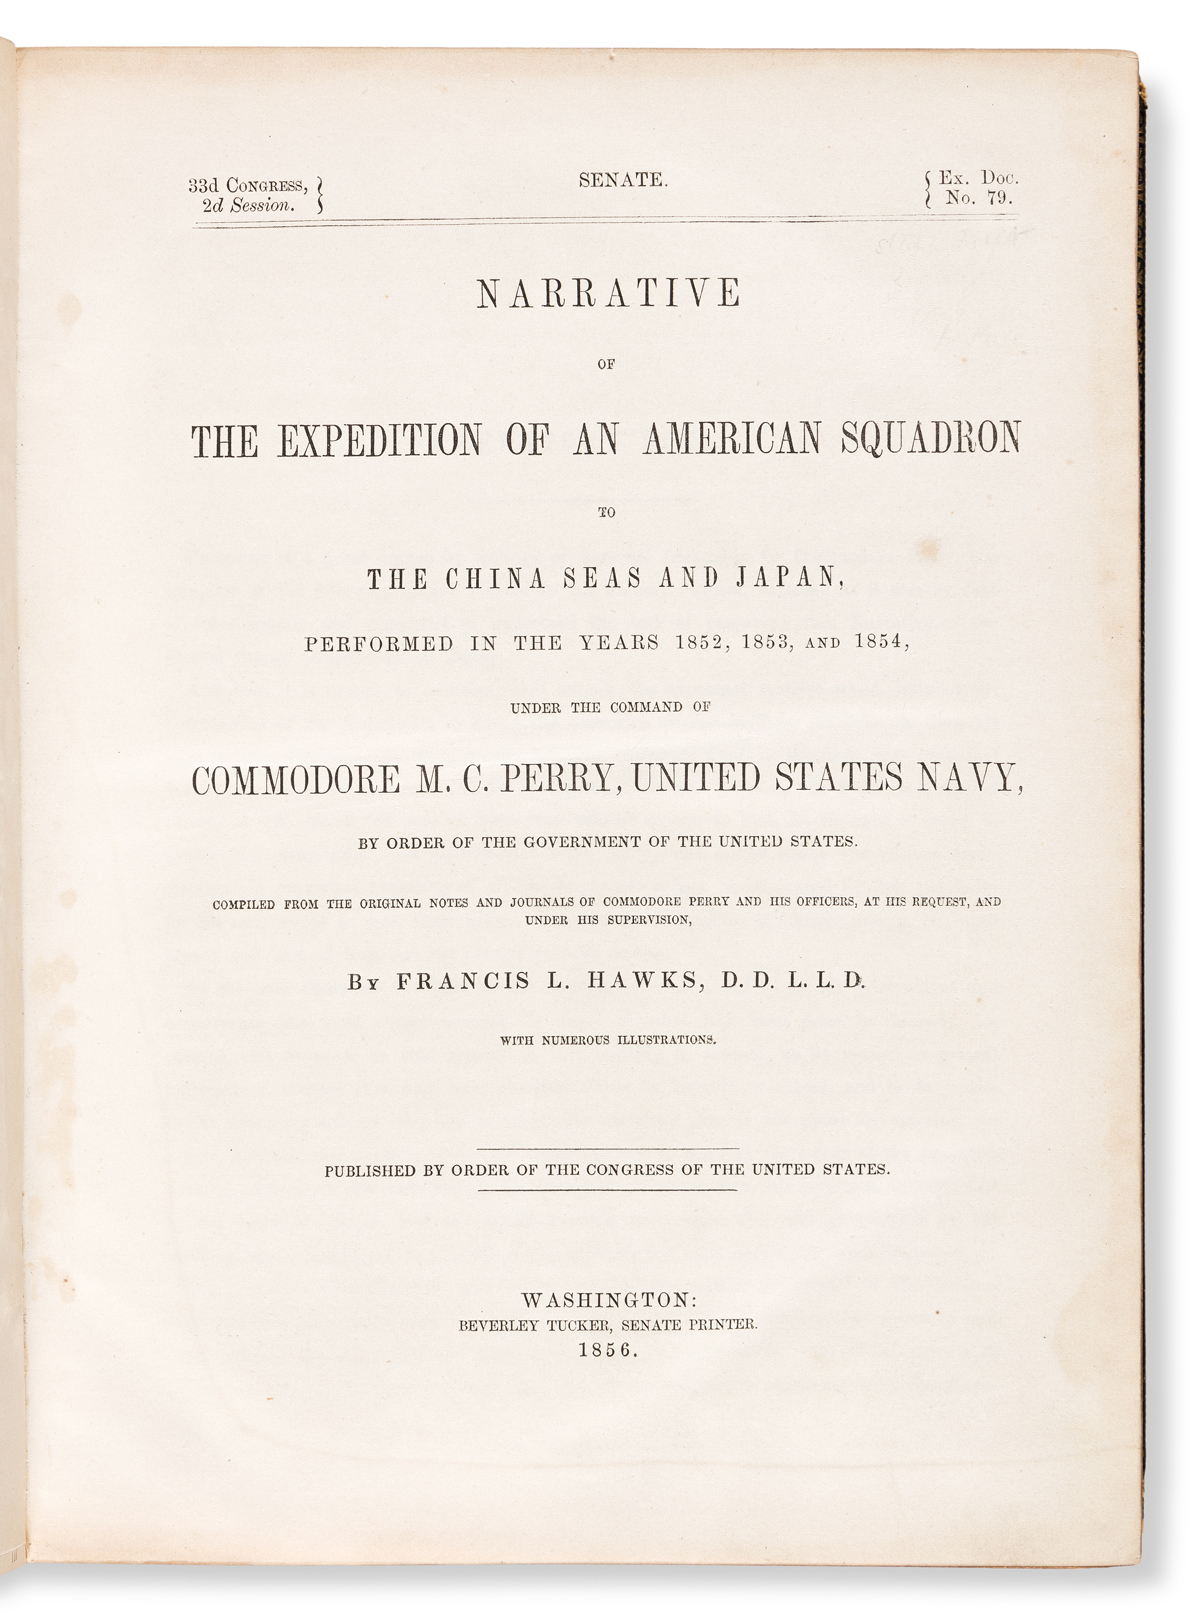 Perry, Matthew Calbraith (1794-1858) ed. Francis L. Hawks (1798-1866) Narrative of the Expedition of an American Squadron to the China